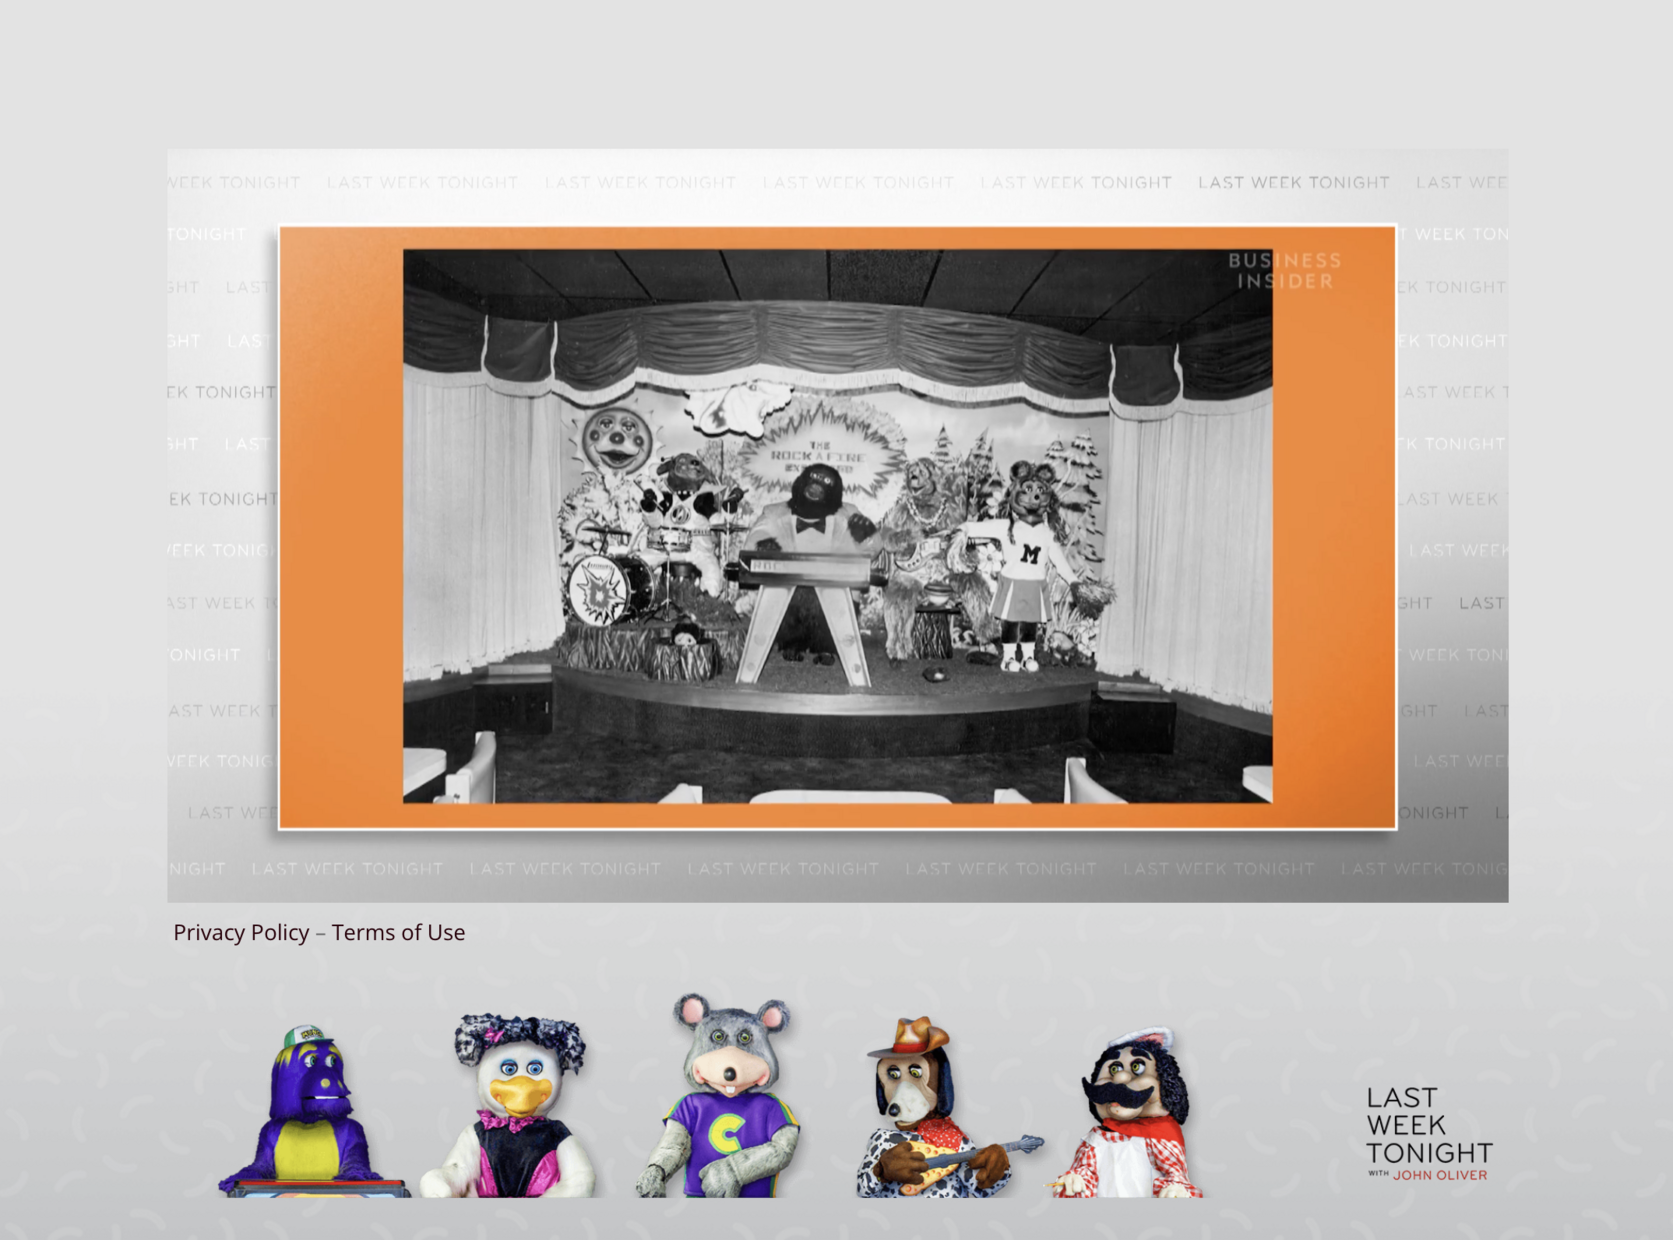 Screenshot of the Last Week Tonight video player showing a black and white picture of Showbiz Pizza Place’s Rock-afire Explosion animatronic band